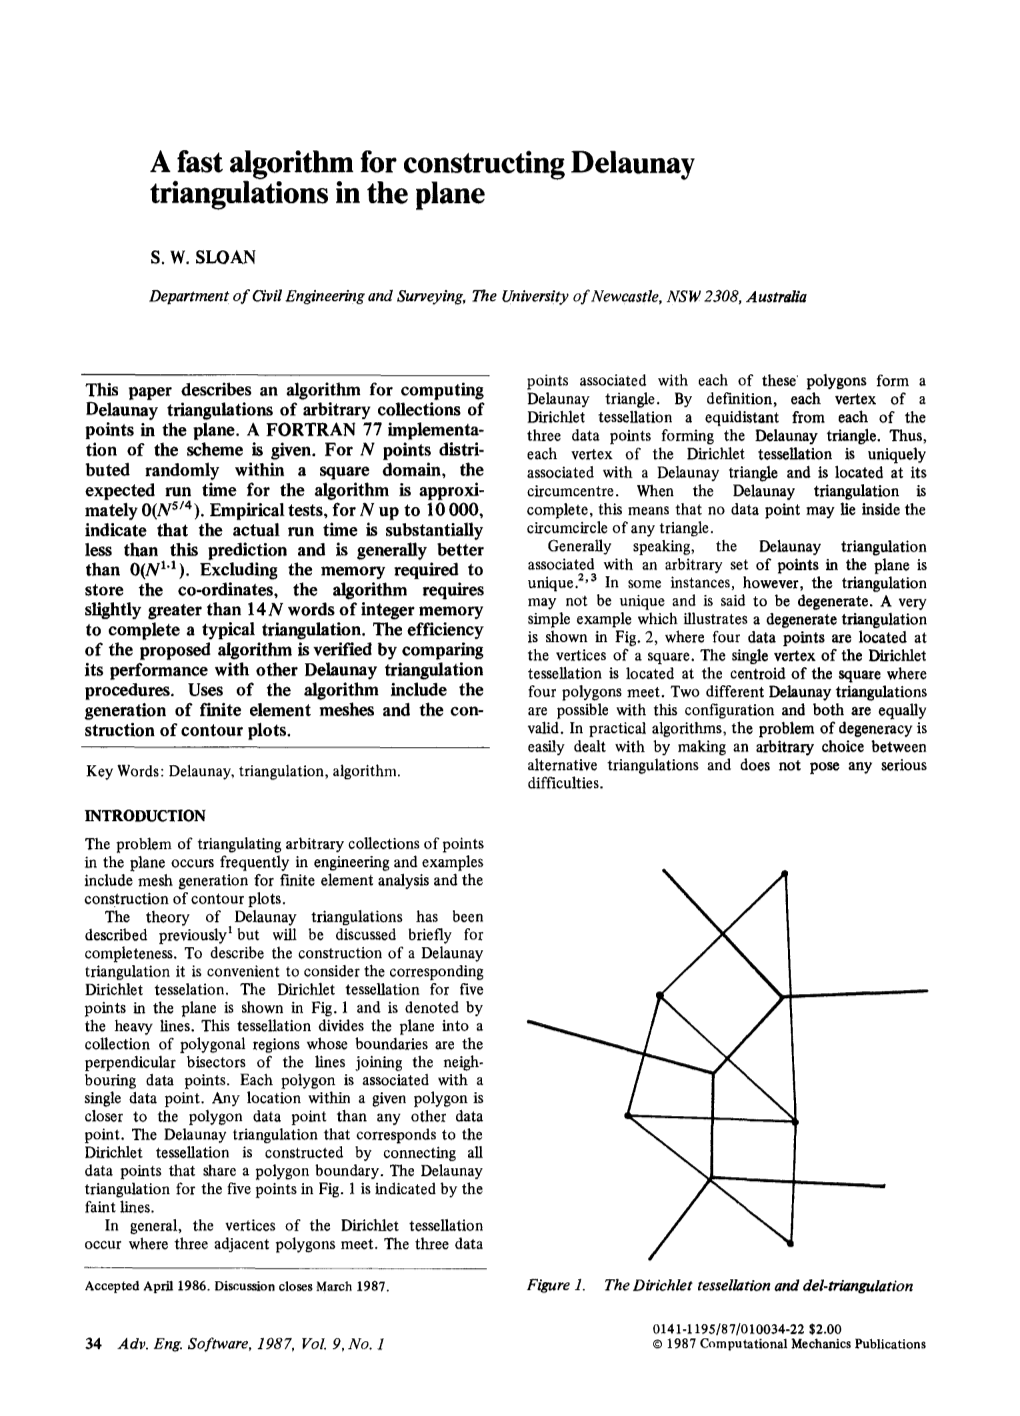 A Fast Algorithm for Constructing Delaunay Triangulations in the Plane